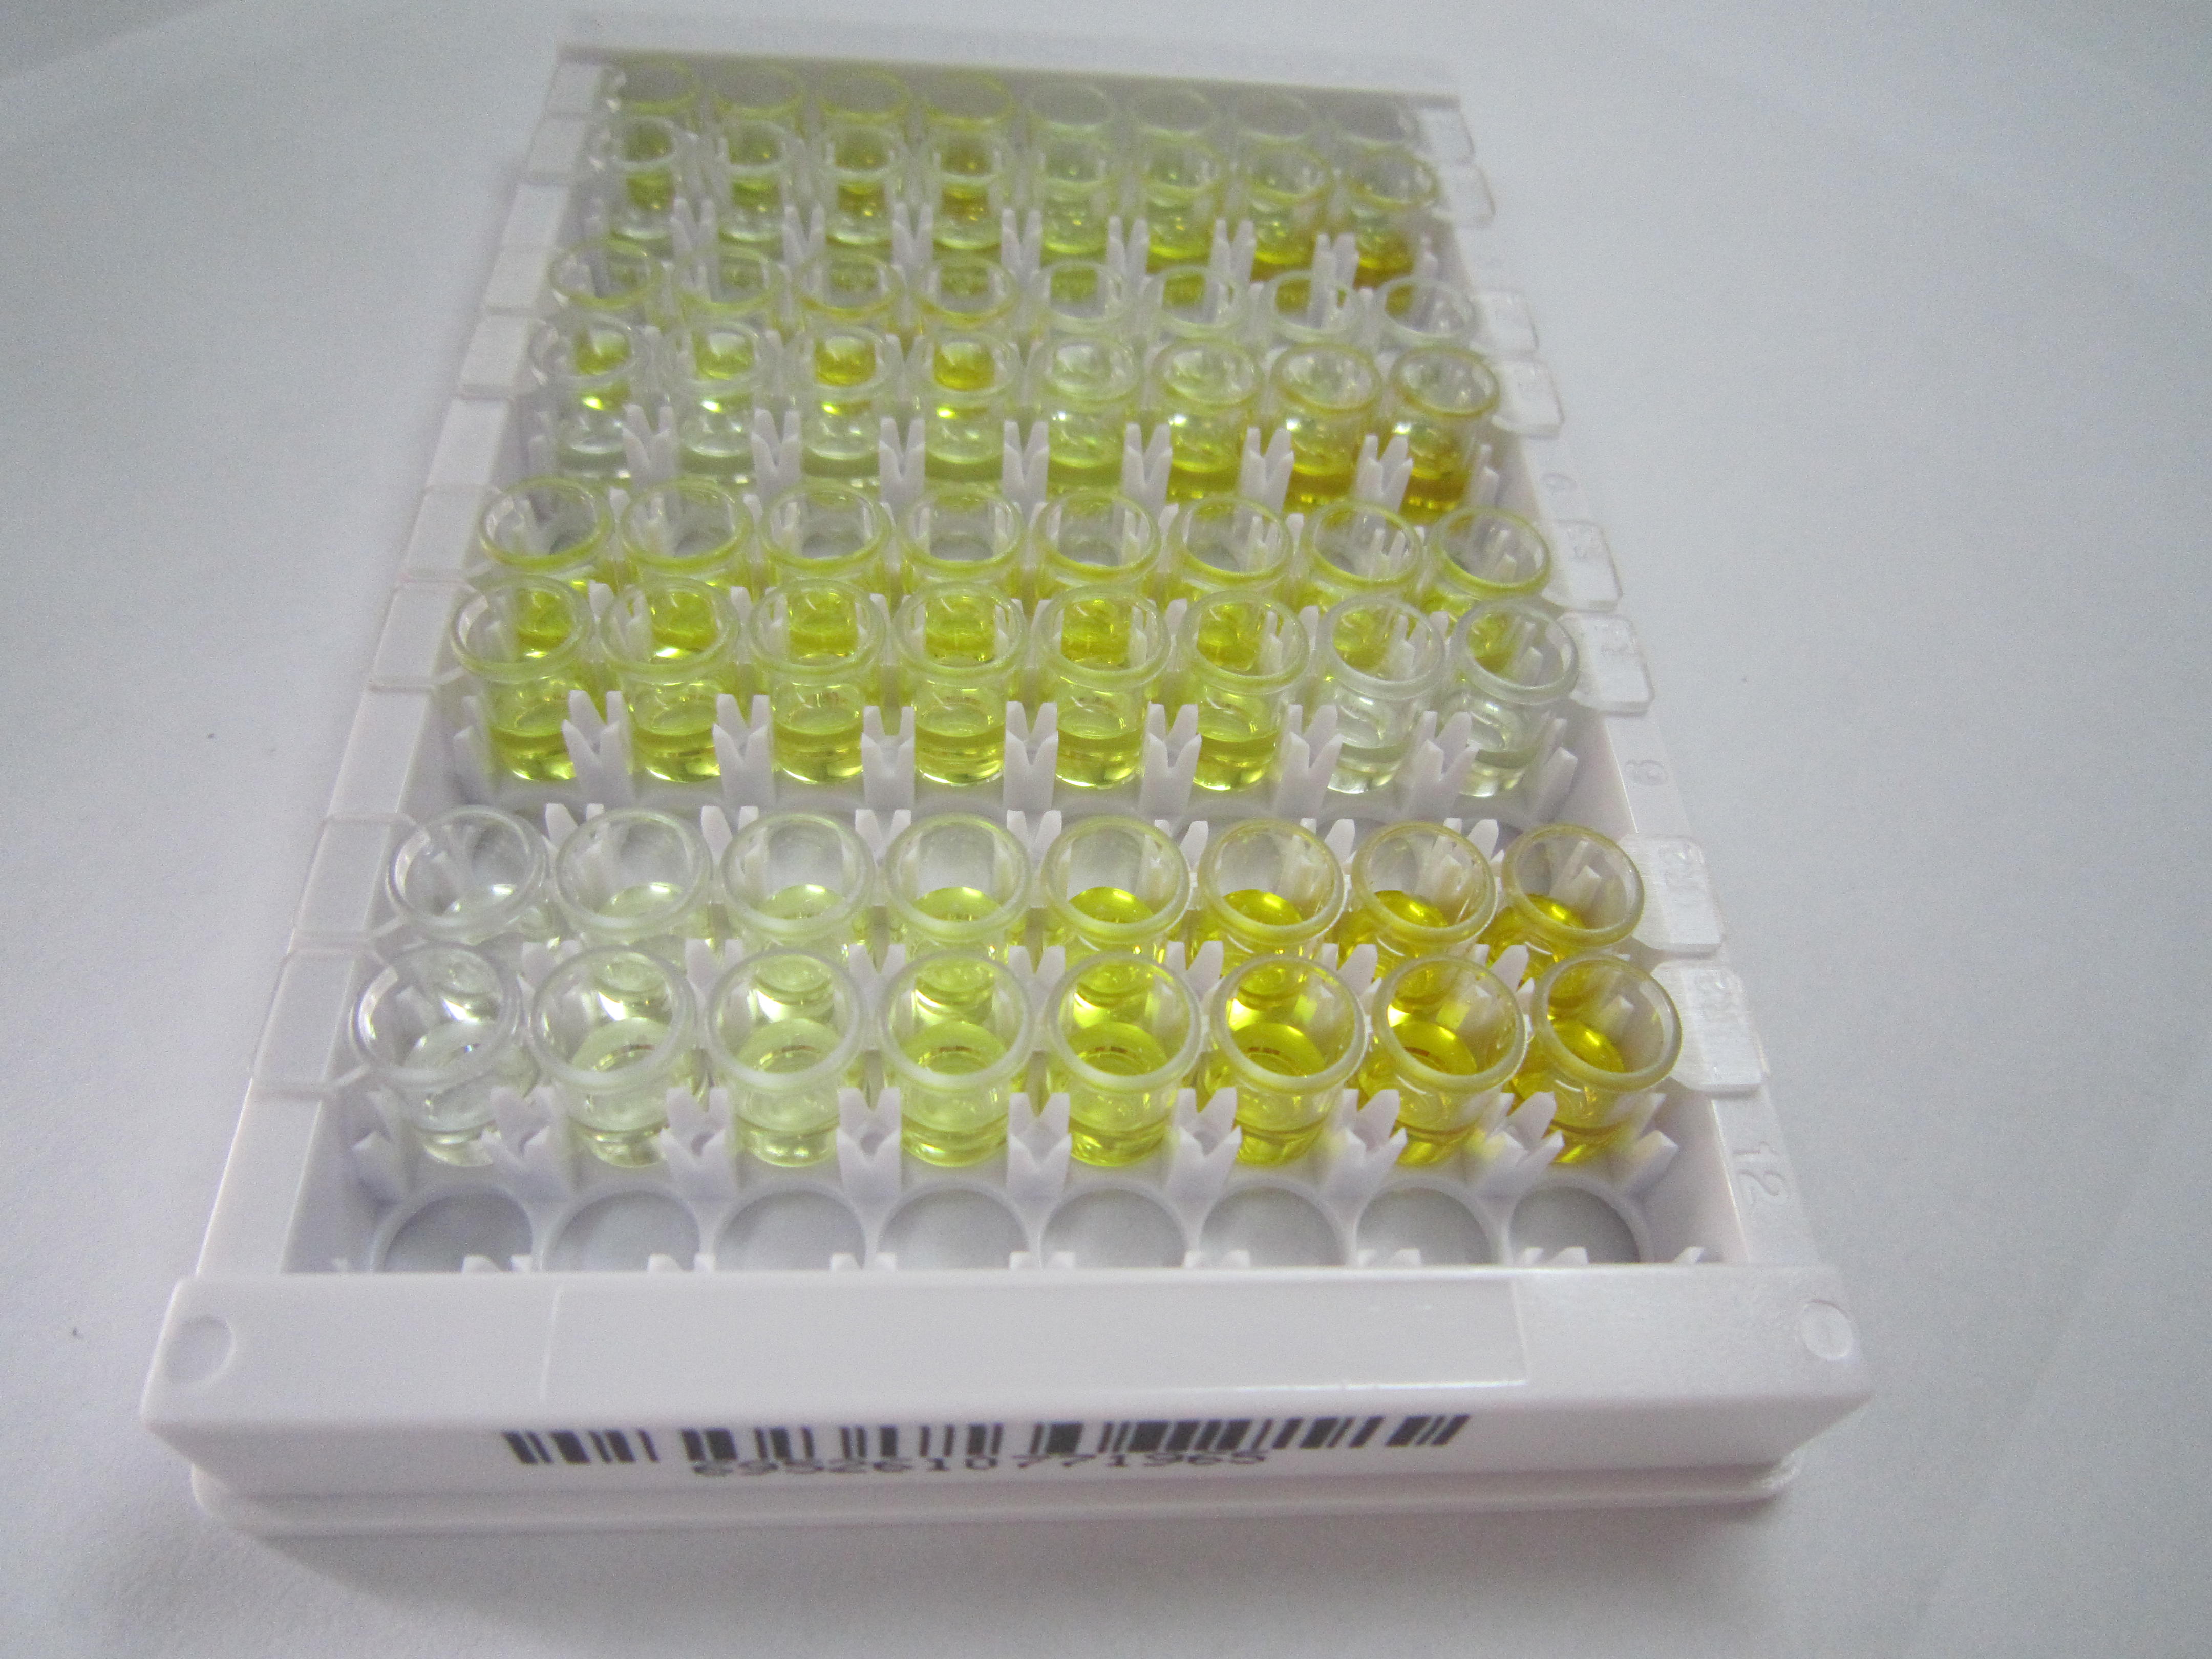 ELISA Kit for Angiopoietin Like Protein 8 (ANGPTL8)